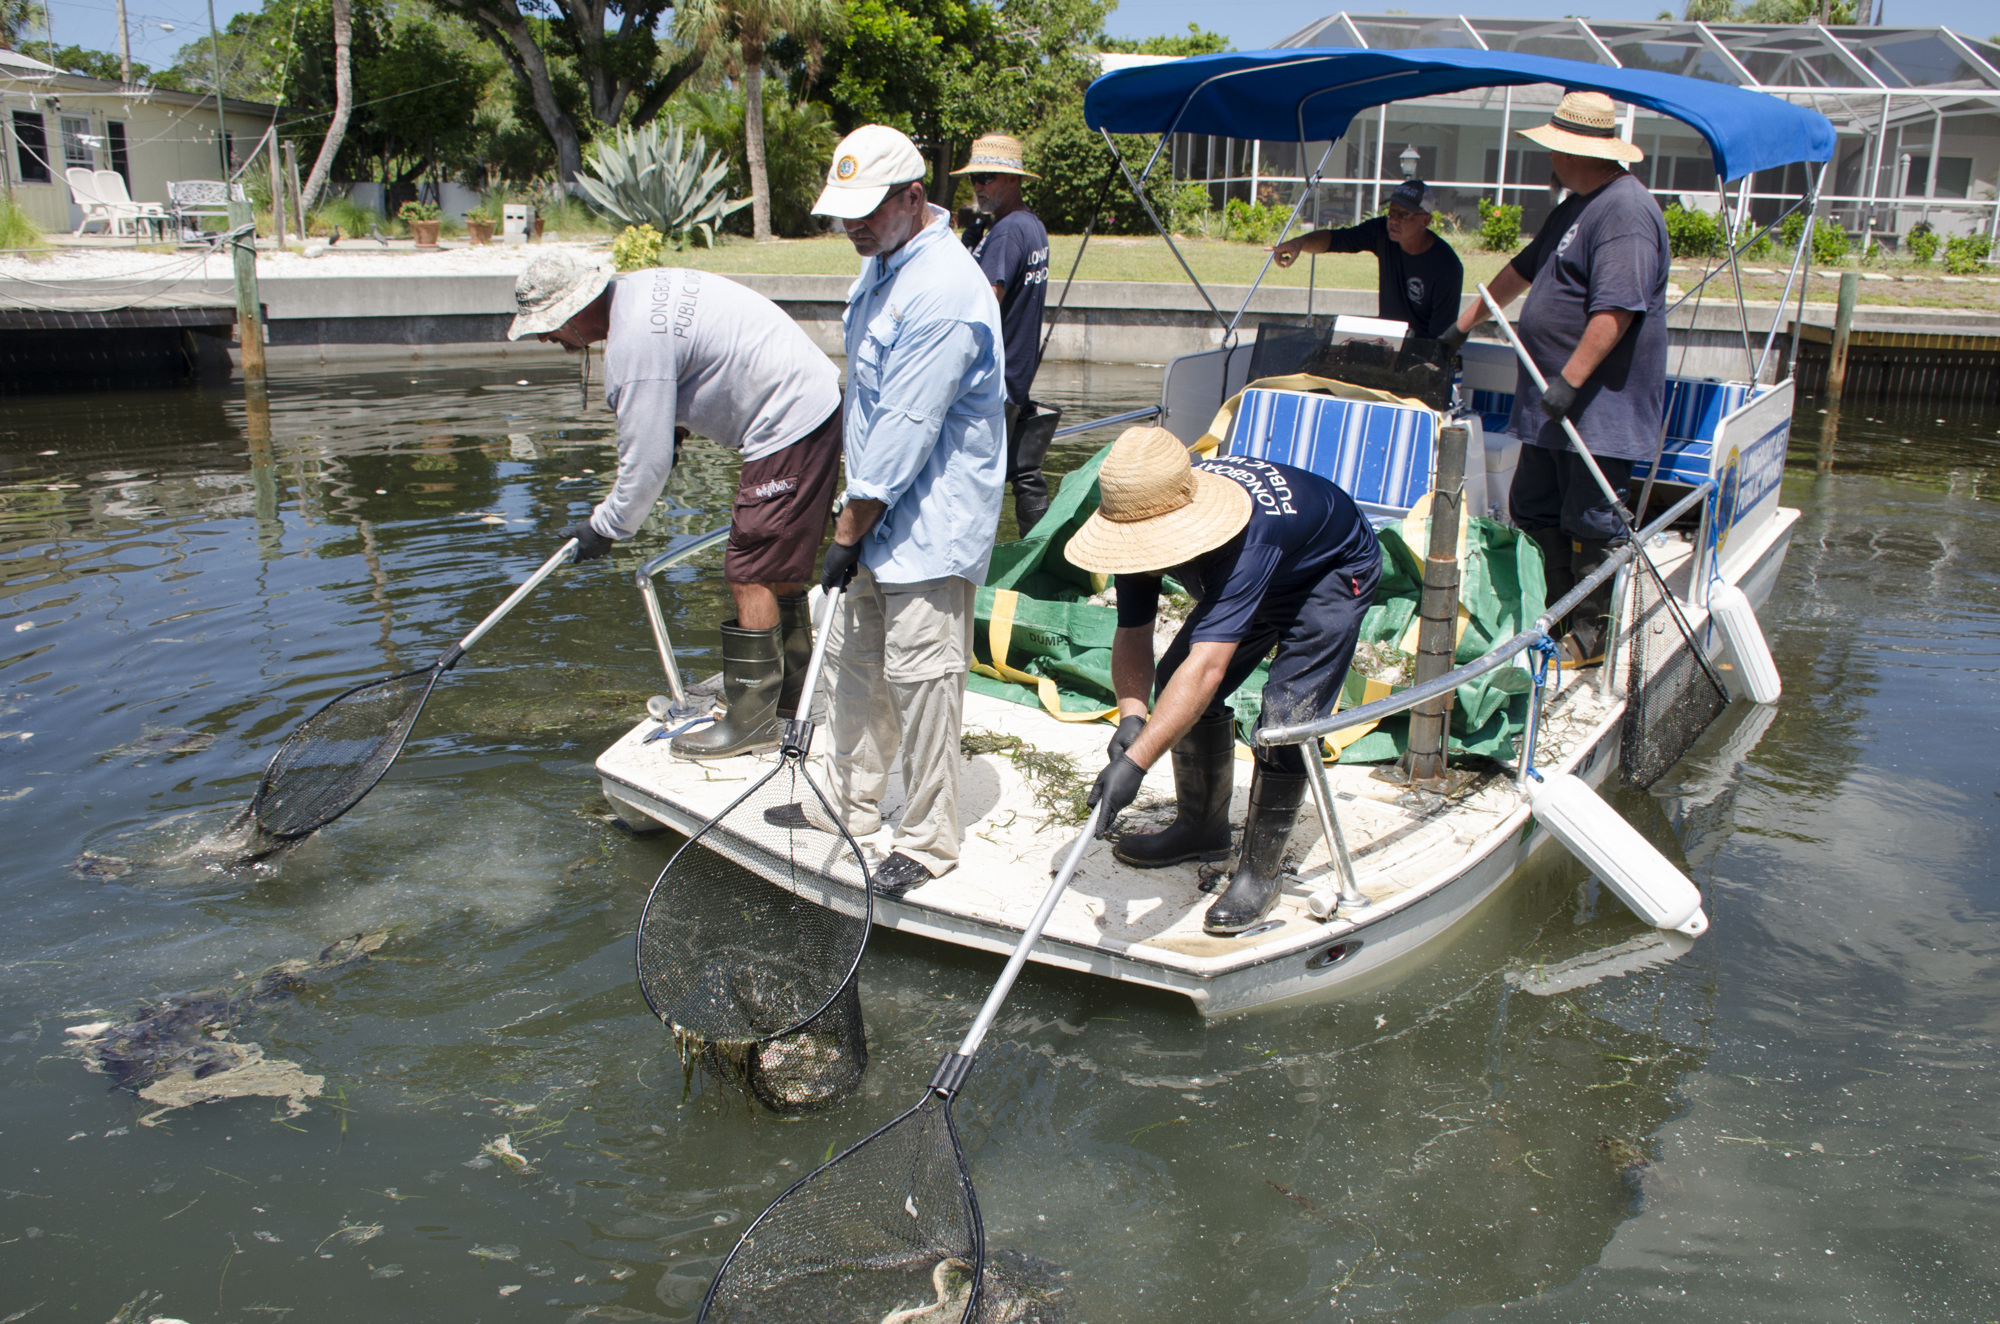 A Longboat crew, complete with Town Manager Tom Harmer, center, cleans up fish kills from red tide in the Key's canals.